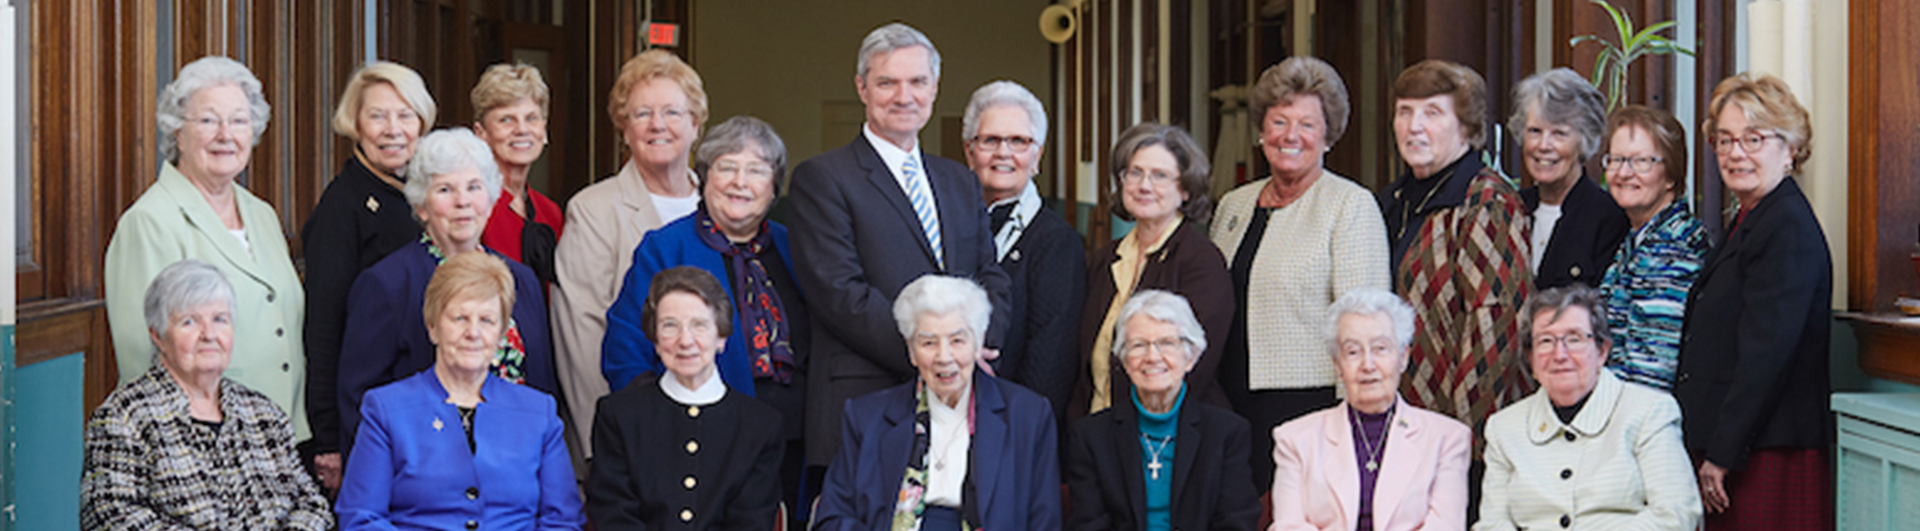 President Boomgaarden with the Sisters of St. Joseph.